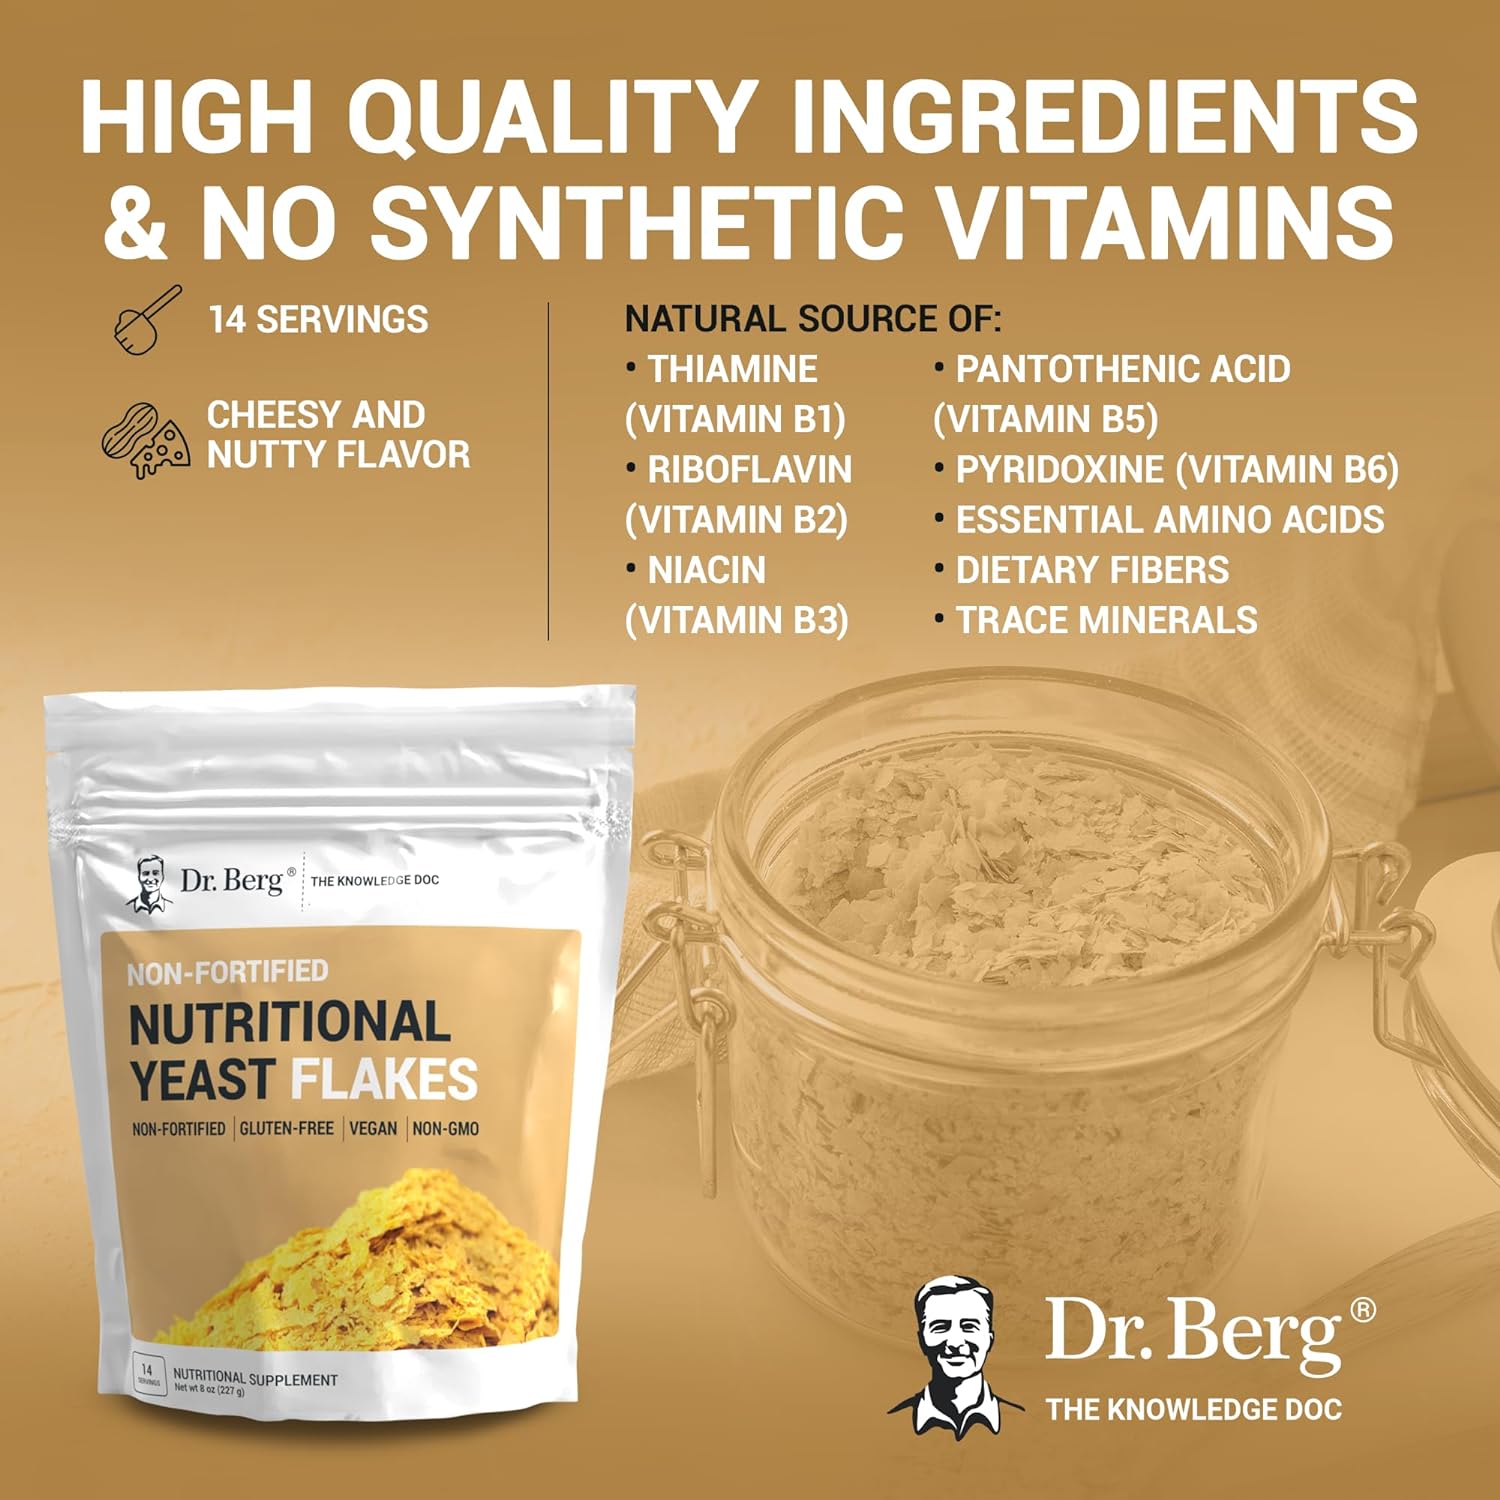 Dr. Berg Premium Nutritional Yeast Flakes - Delicious Non-Fortified Nutritional Yeast with Naturally Occurring B Vitamins - 8oz